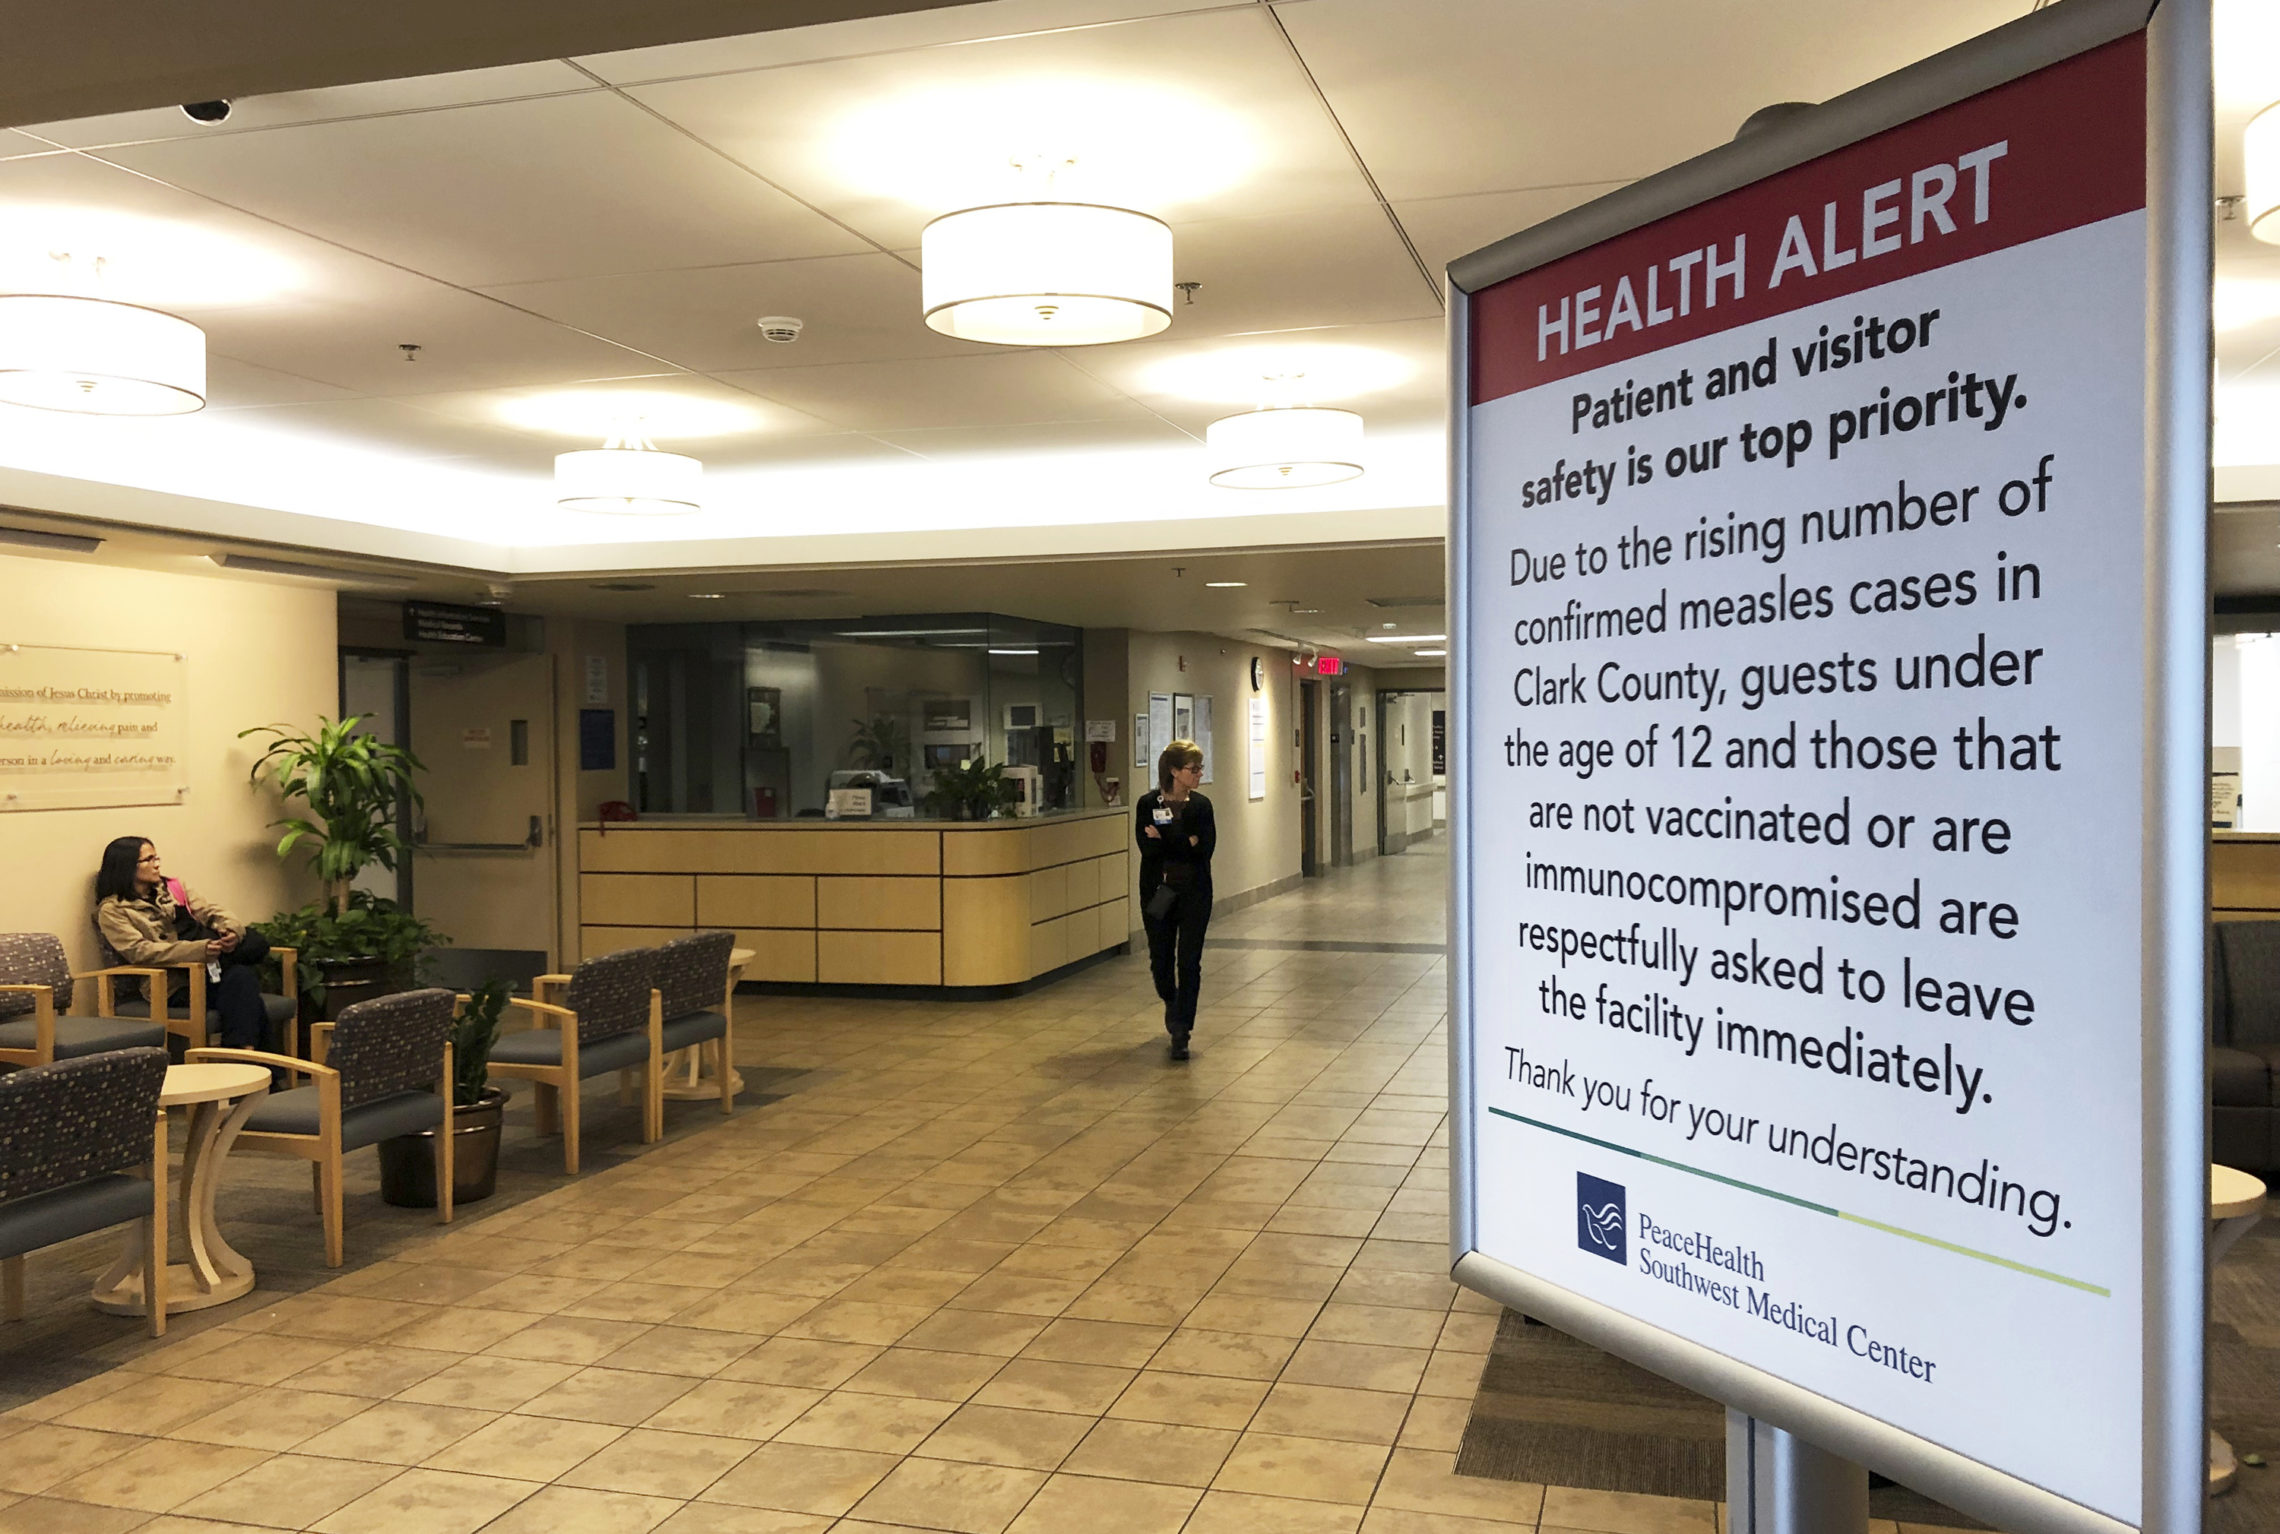 A sign prohibiting all children under 12 and unvaccinated adults stands at the entrance to PeaceHealth Southwest Medical Center in Vancouver, Wash. CREDIT: GILLIAN FLACCUS/AP